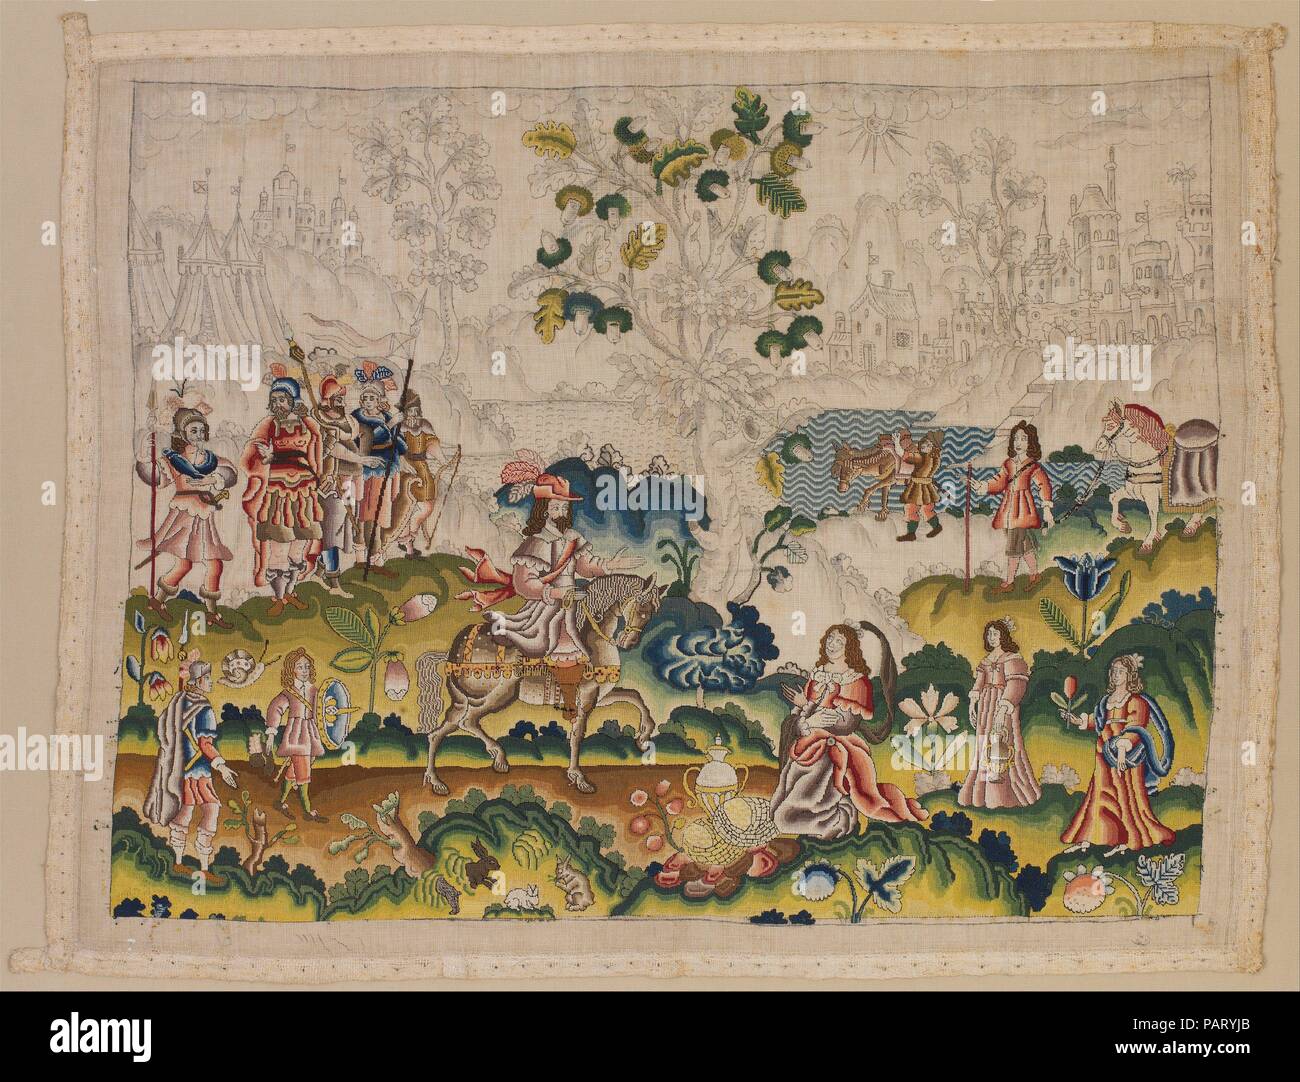 David and Abigail. Culture: British. Dimensions: H. 19 x W. 24 1/2 in. (48.3 x 62.2 cm). Date: mid-17th century.  This panel was probably intended as a cushion cover. It illustrates scenes from the life of the biblical patriarch Abraham, as recounted in the Book of Genesis. The central scene shows Abraham being informed by a host of angels that his wife Sarah will bear him a son, despite her advanced age. Other scenes include Abraham banishing his servant Hagar and her son by Abraham, Ishmael (lower left corner), and Abraham's attempted sacrifice of Sarah's son Isaac, the act he was ordered by Stock Photo